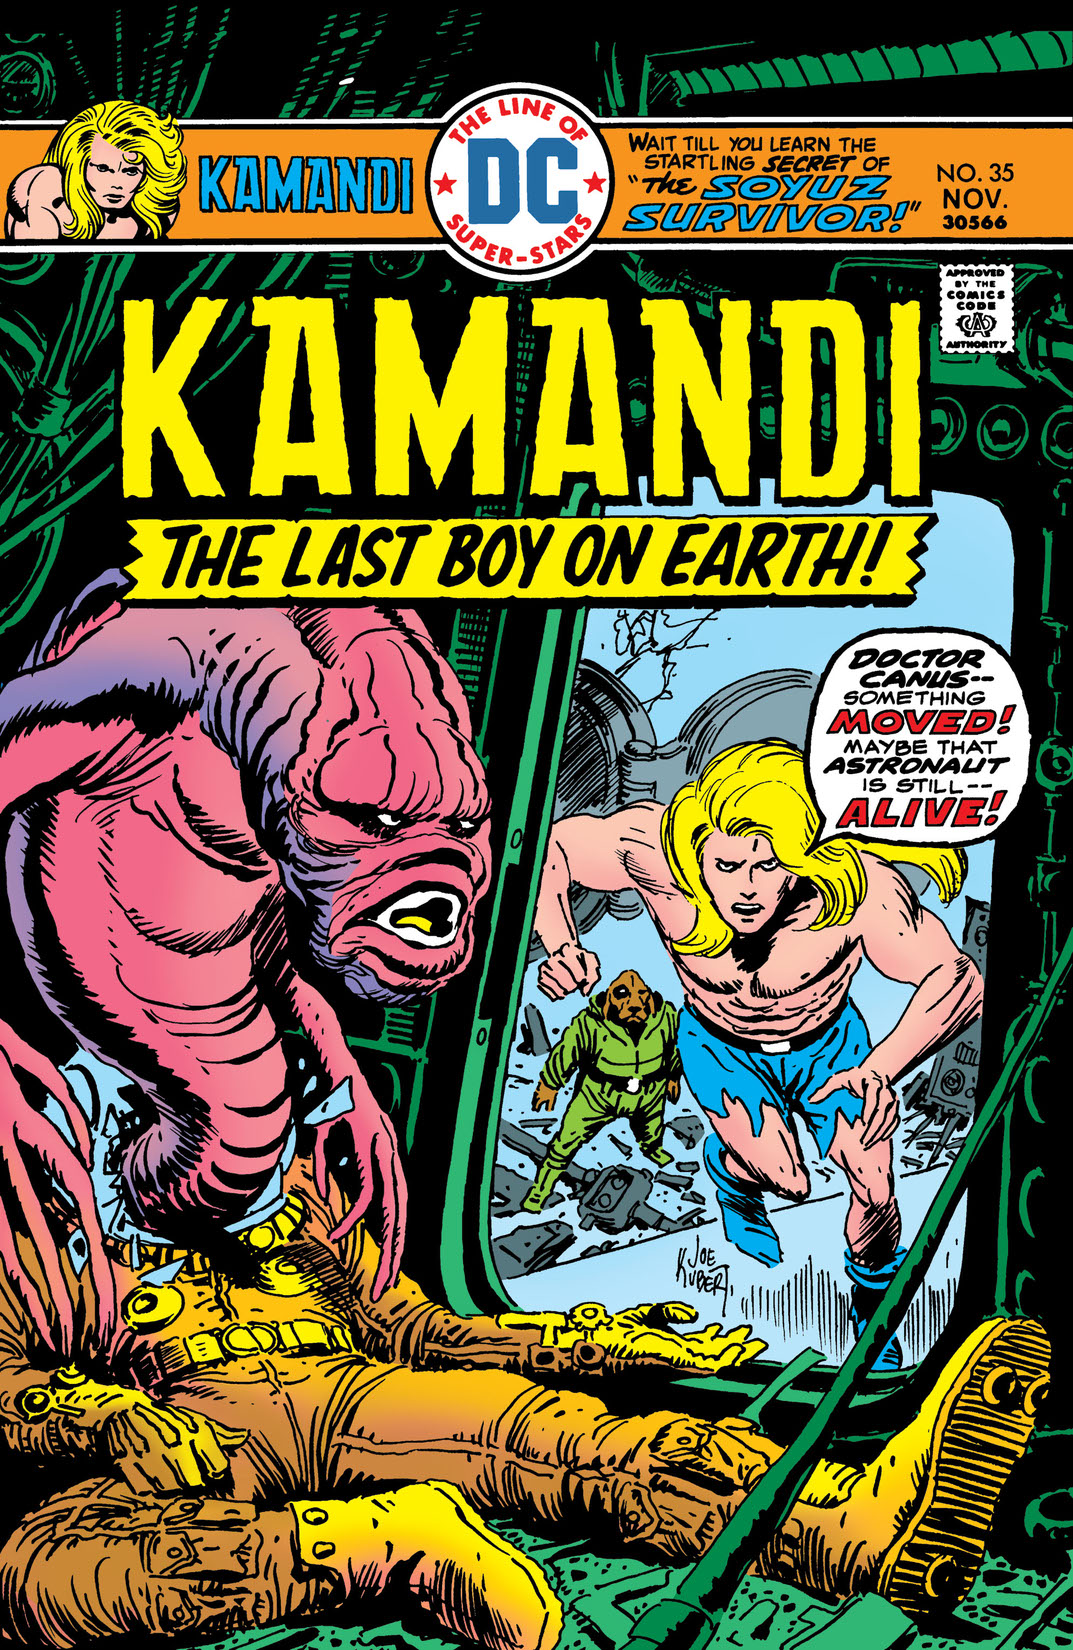 Kamandi: The Last Boy on Earth #35 preview images